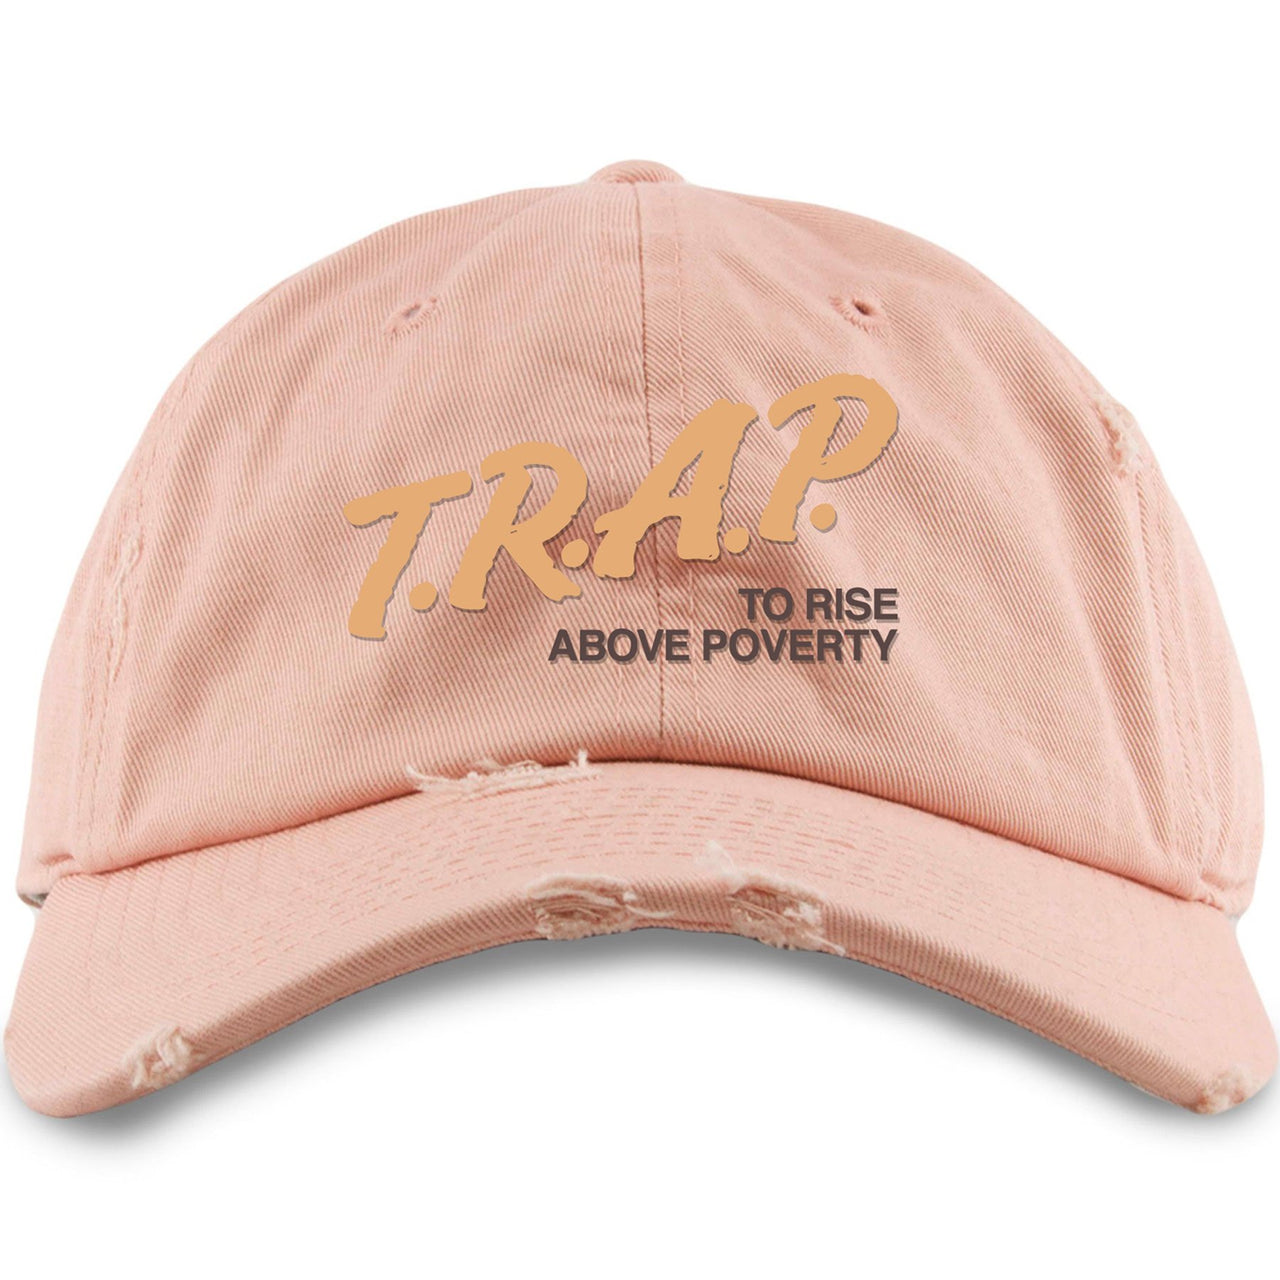 Clay v2 350s Distressed Dad Hat | Trap To Rise Above Poverty, Peach